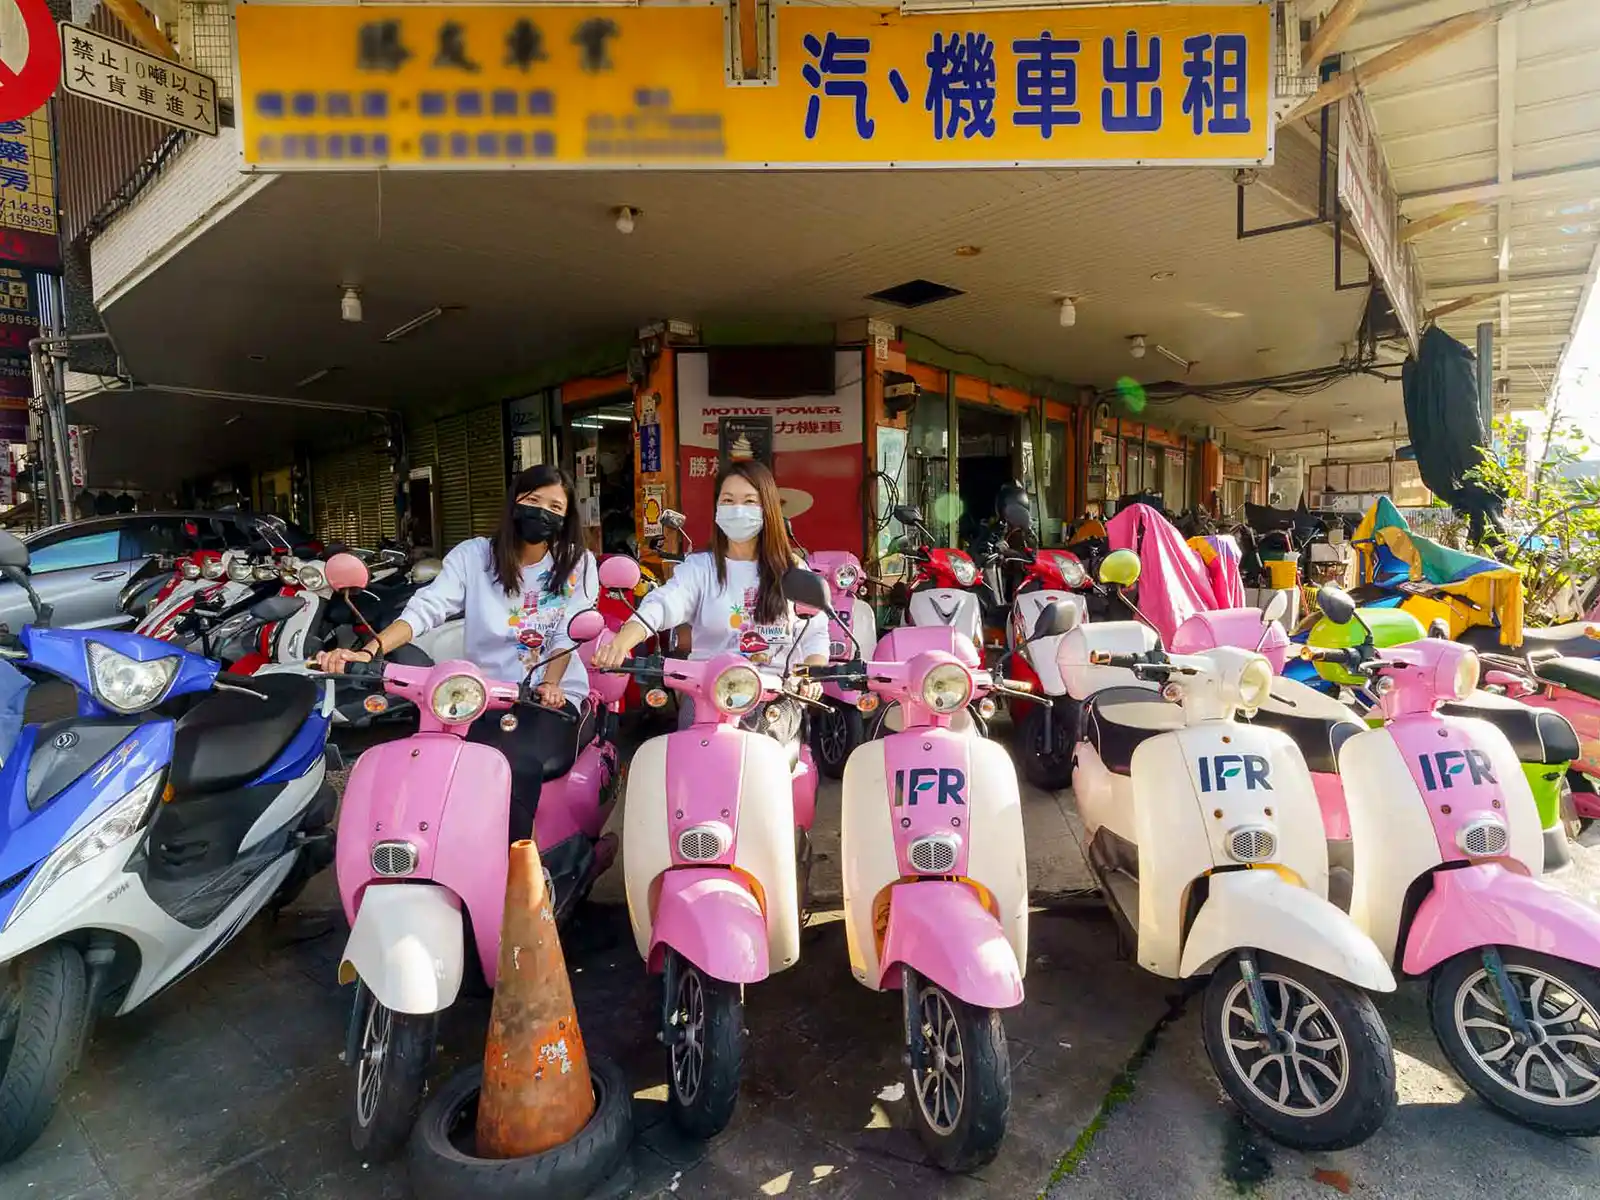 A busy scooter rental shop with a row of pink and other colorful scooters lined up in front.